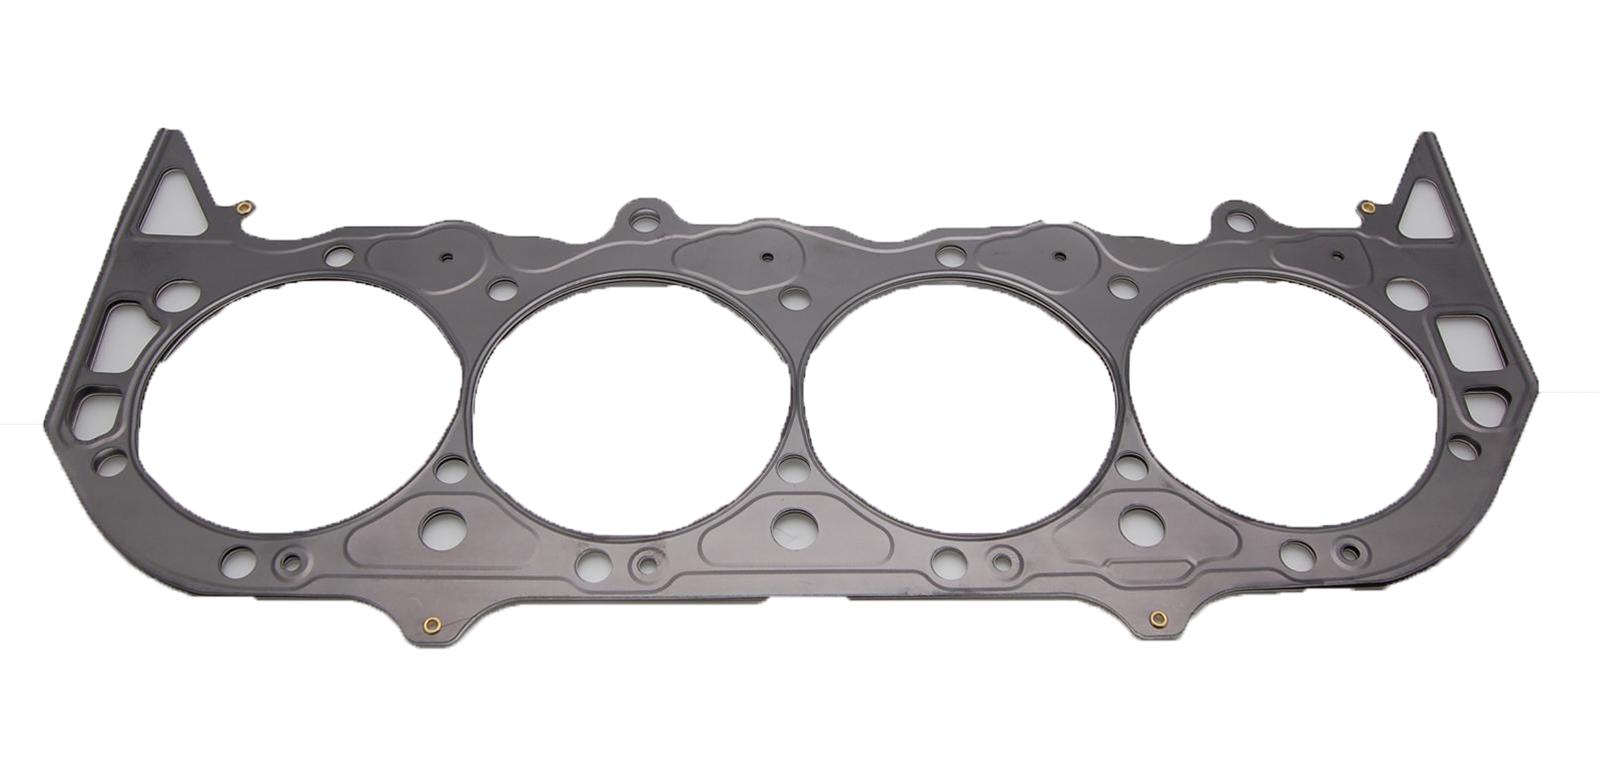 Cometic Gasket C5331-040 MLS .040 Thickness 4.630 Head Gasket for Big Block Chevy 